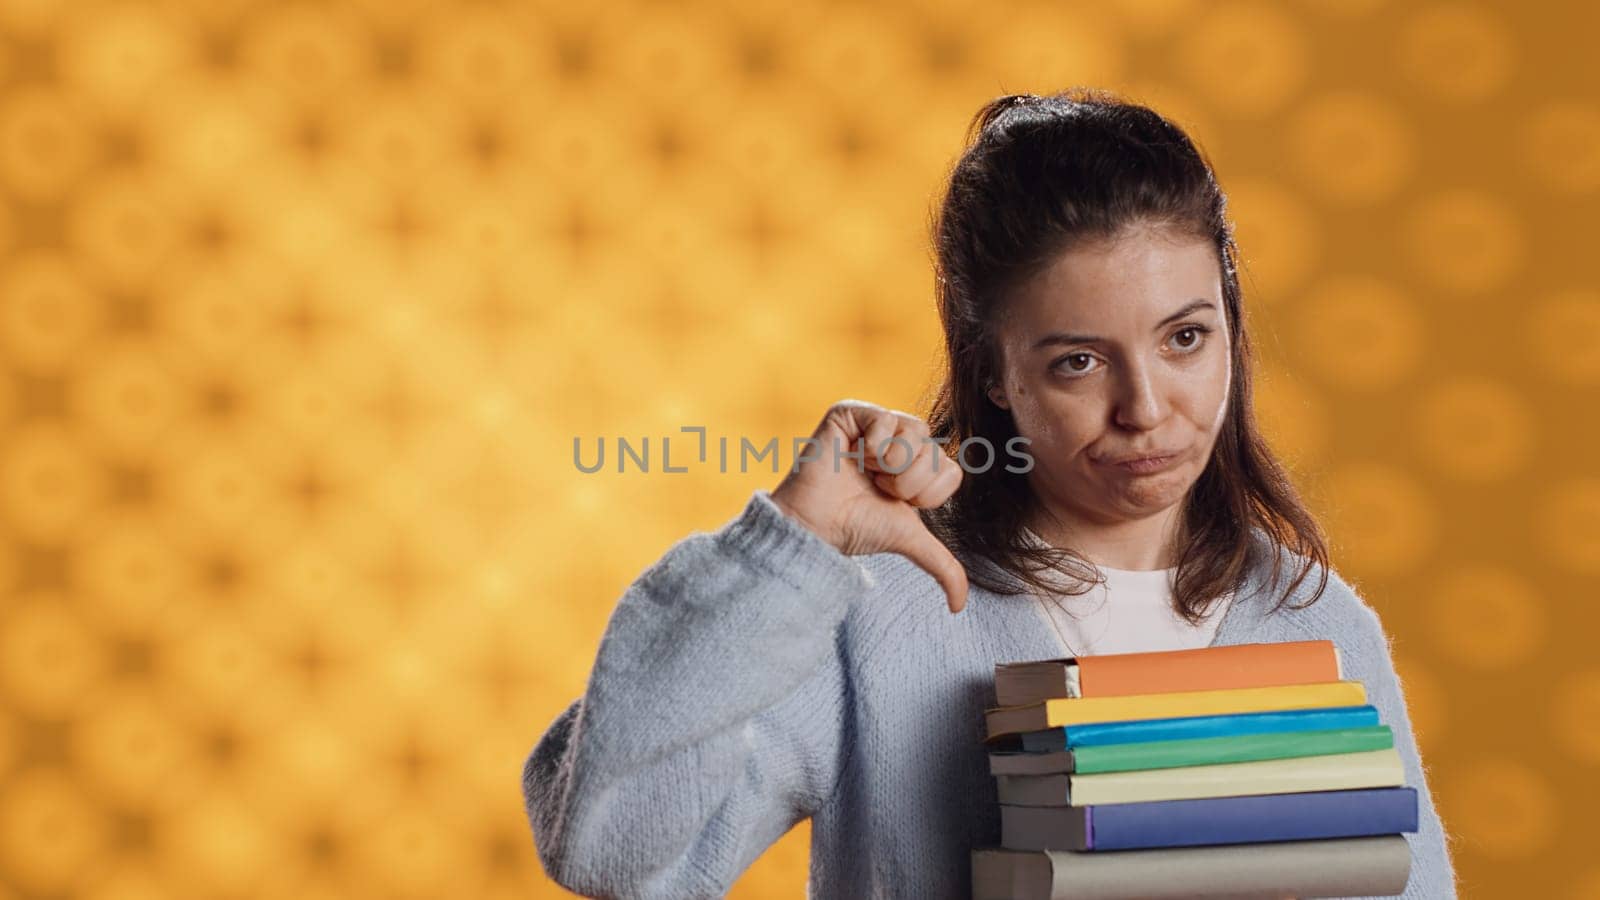 Sulky lady with stack of novels doing thumbs down hand gesturing by DCStudio